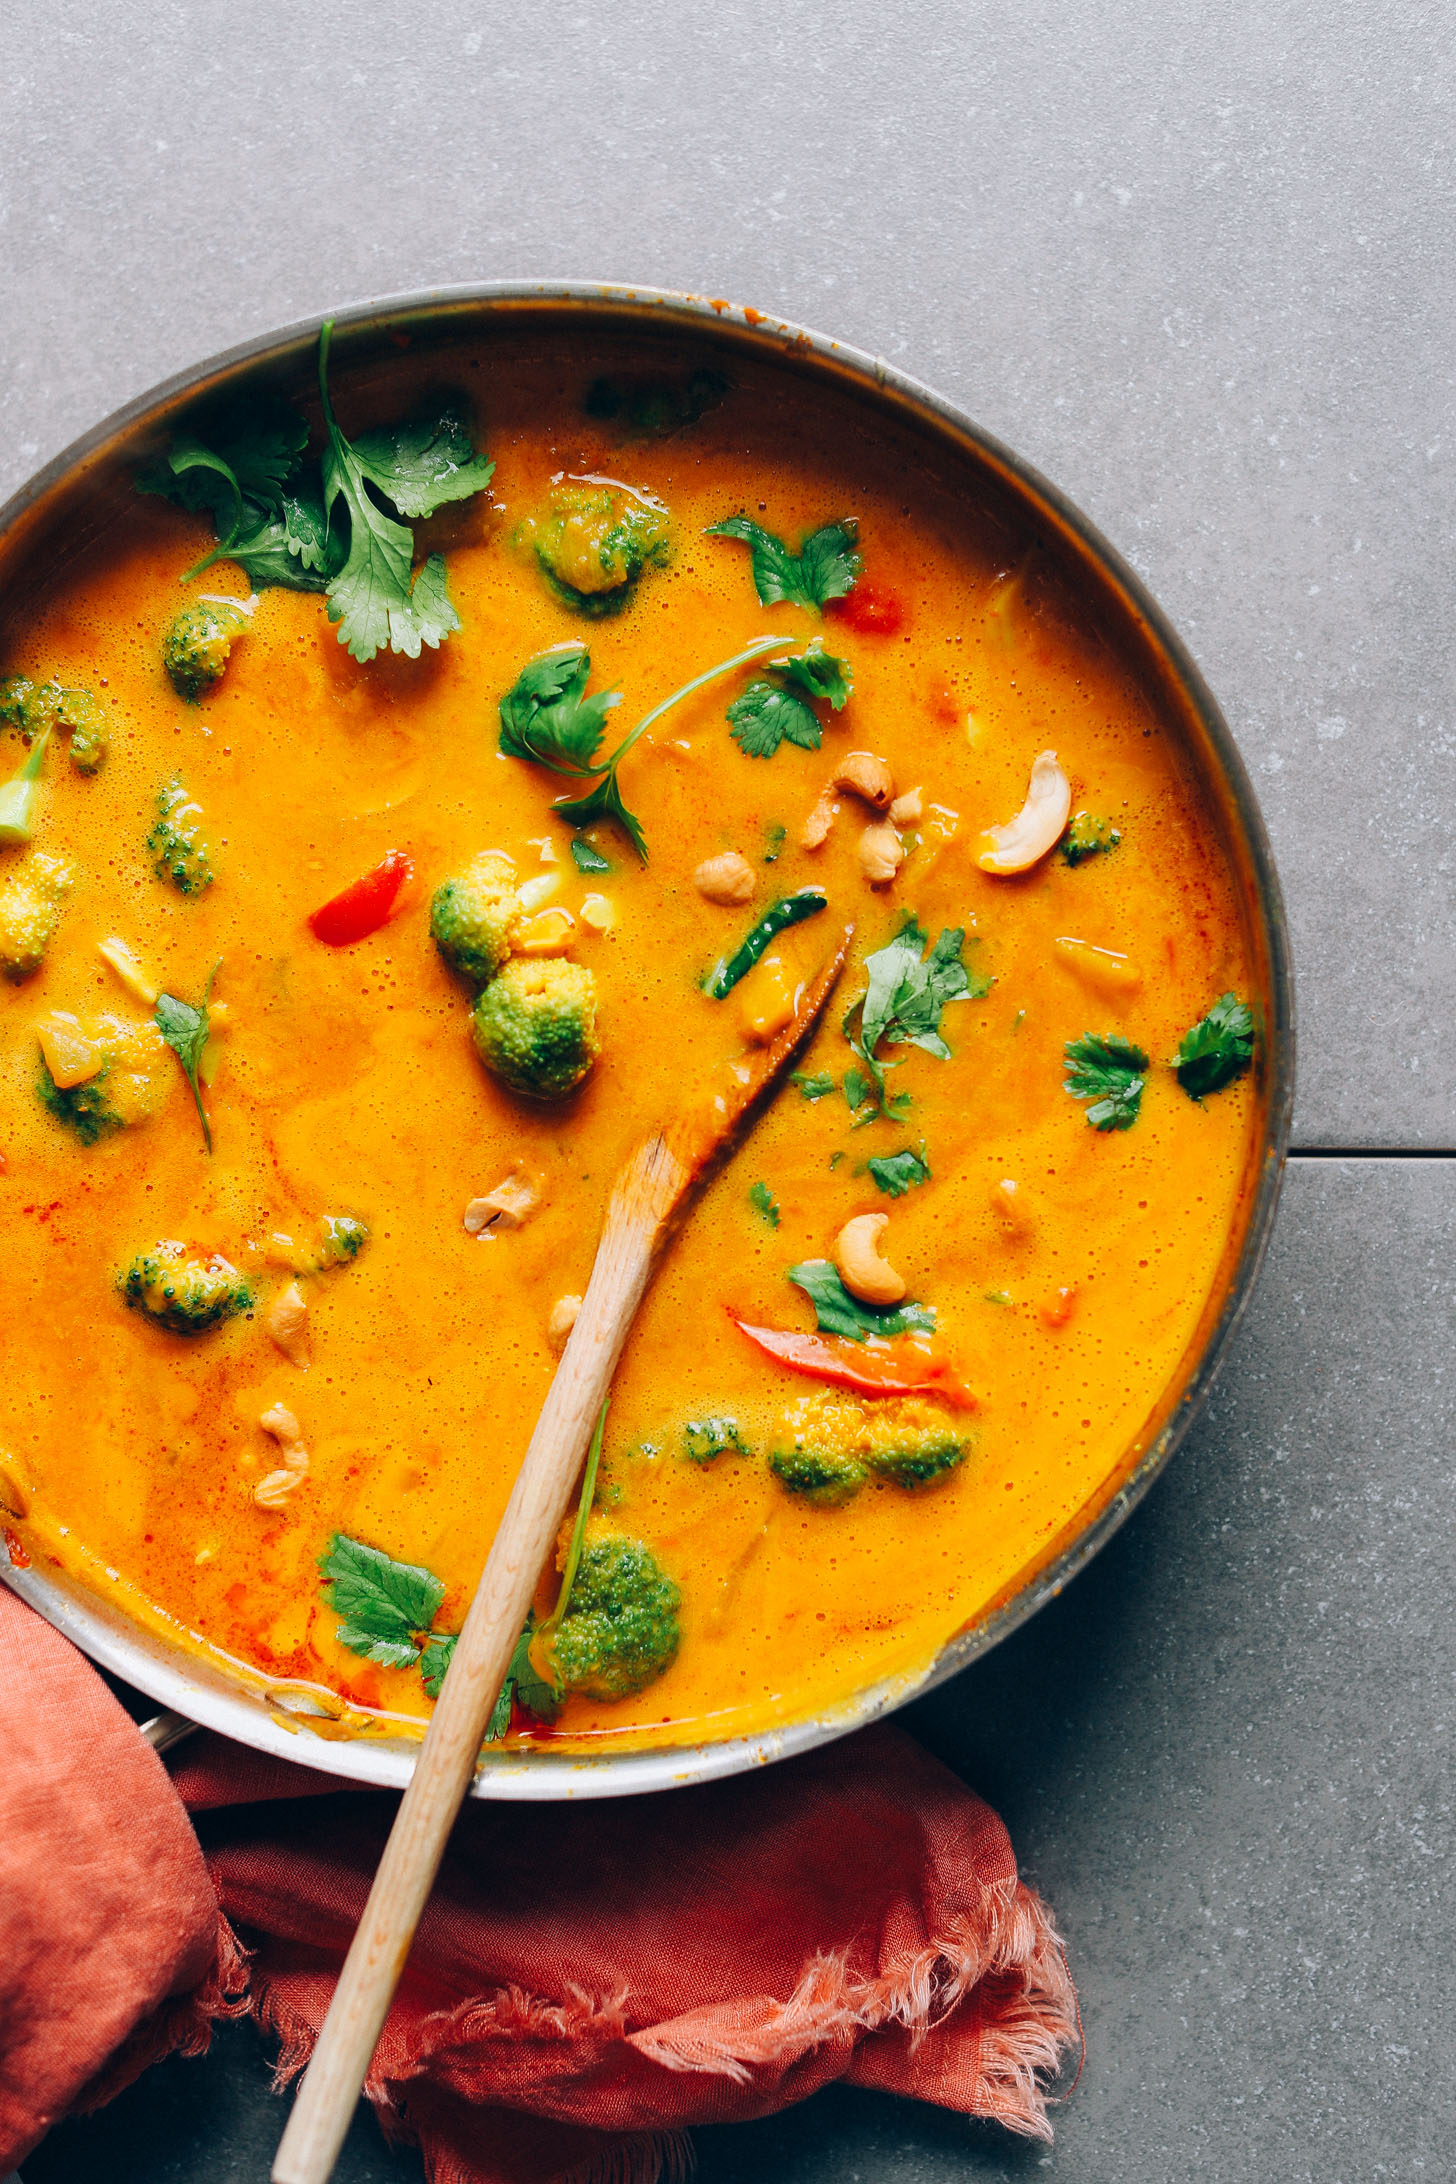 Stirring a pot of AMAZING Vegan Yellow Pumpkin Curry with colorful fresh vegetables